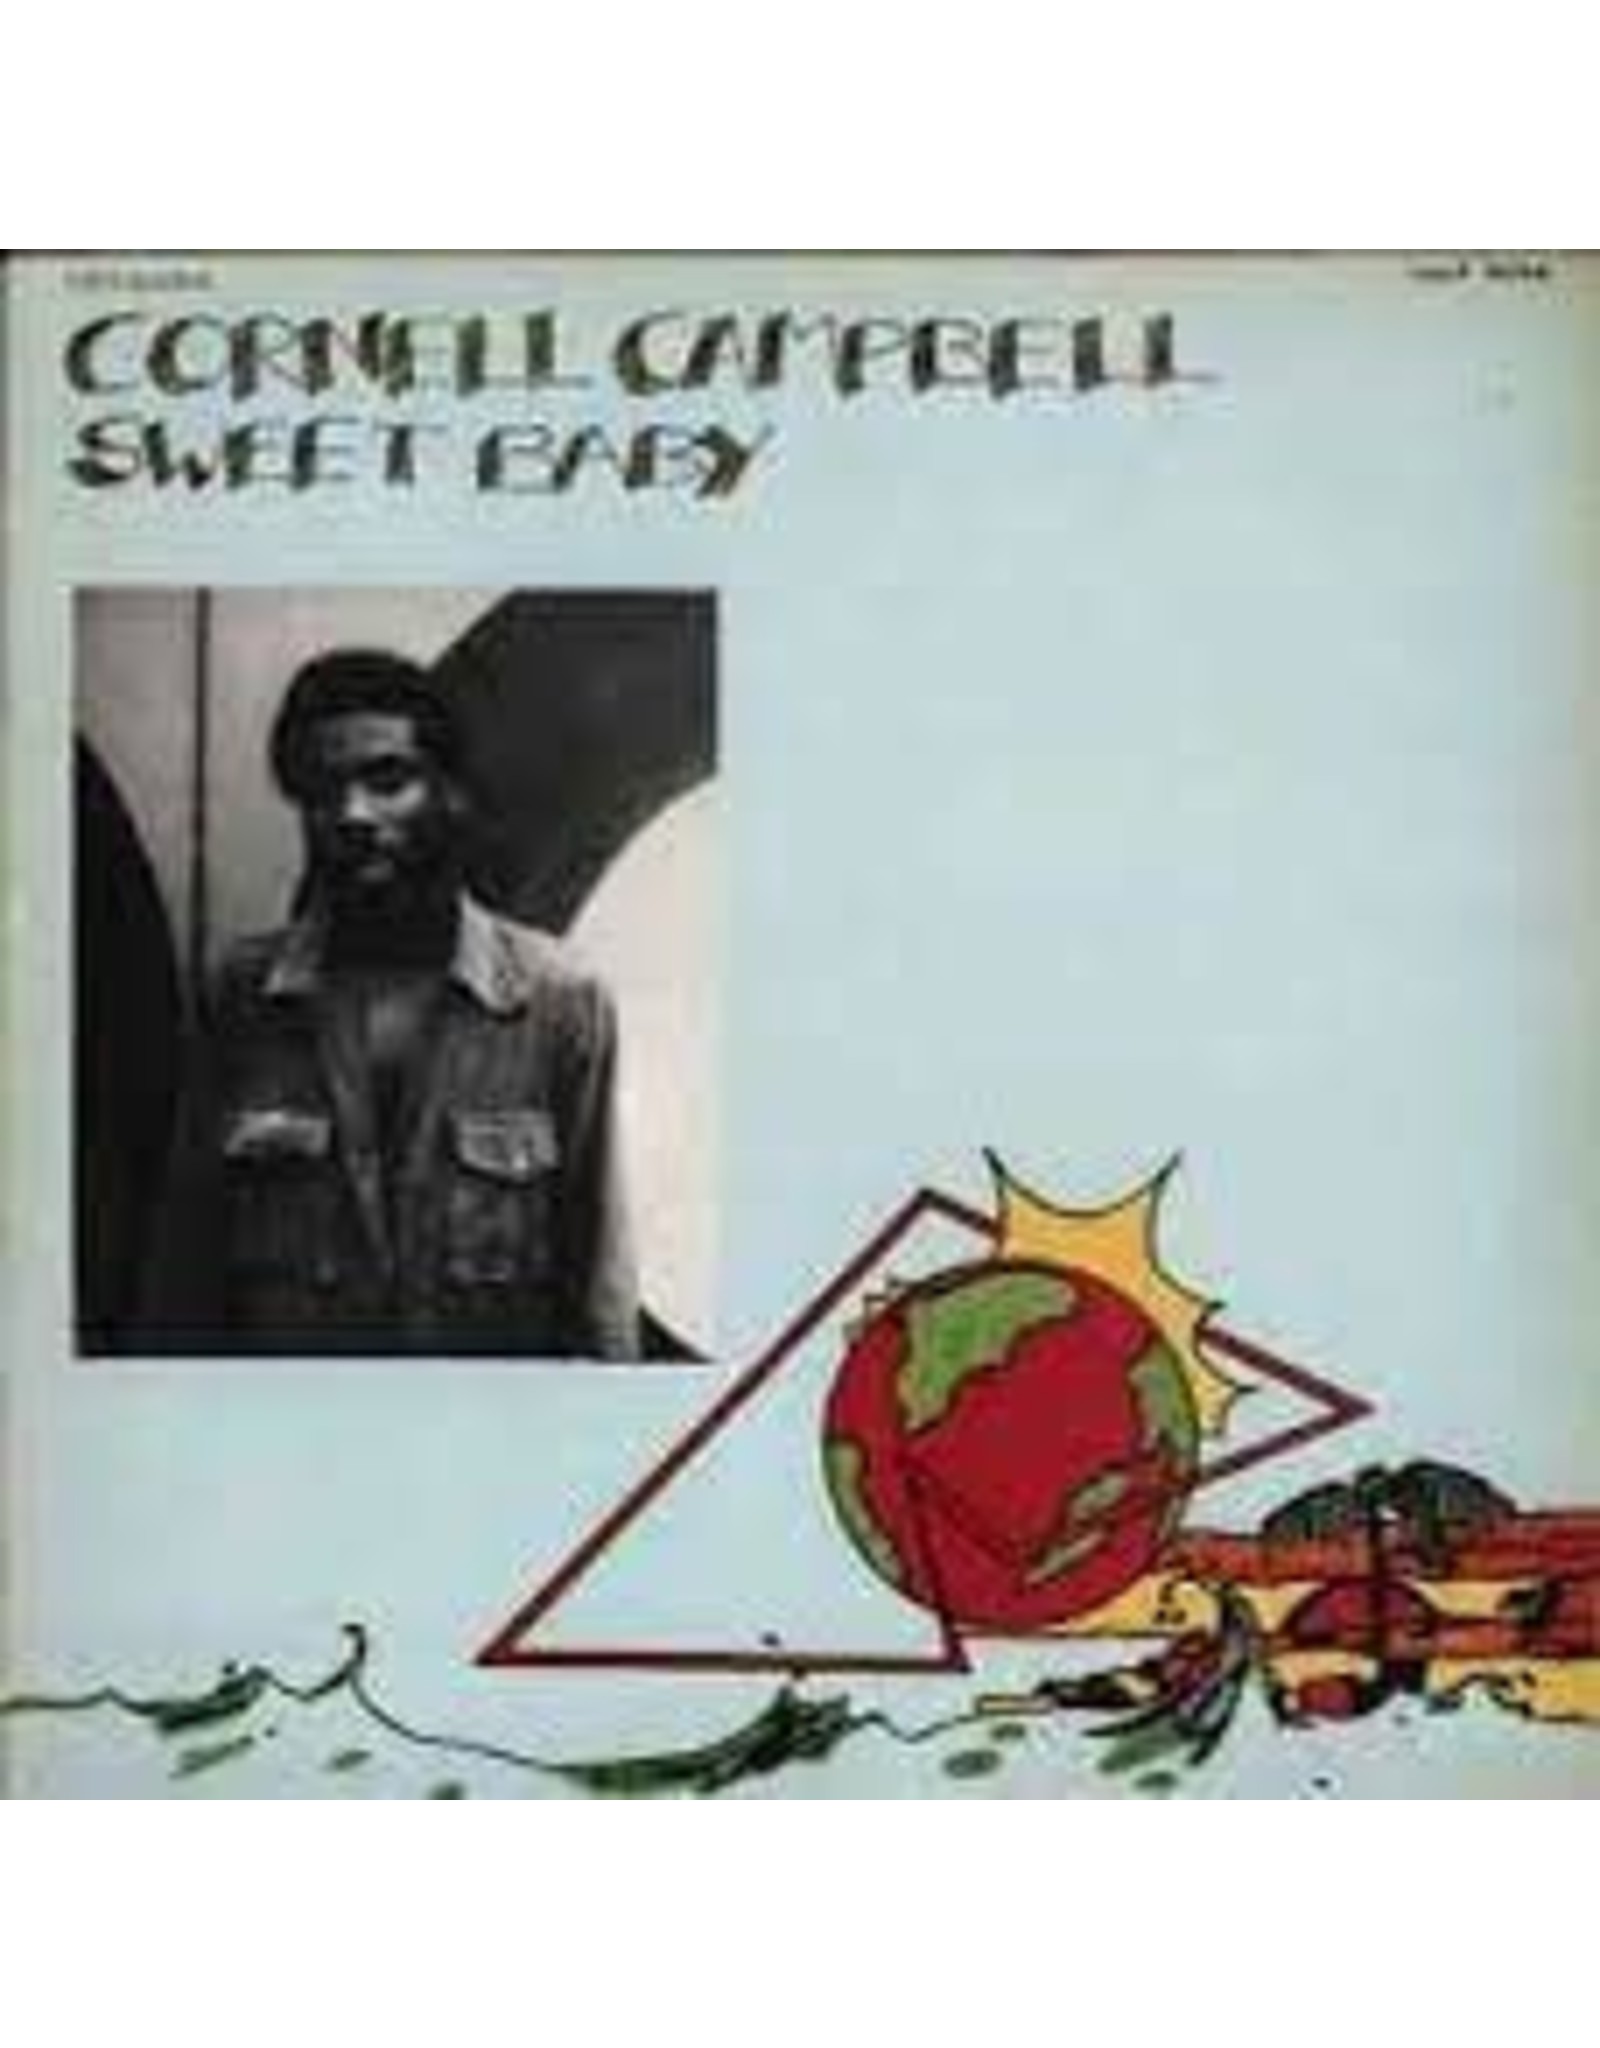 Campbell, Cornell - Sweet Baby LP